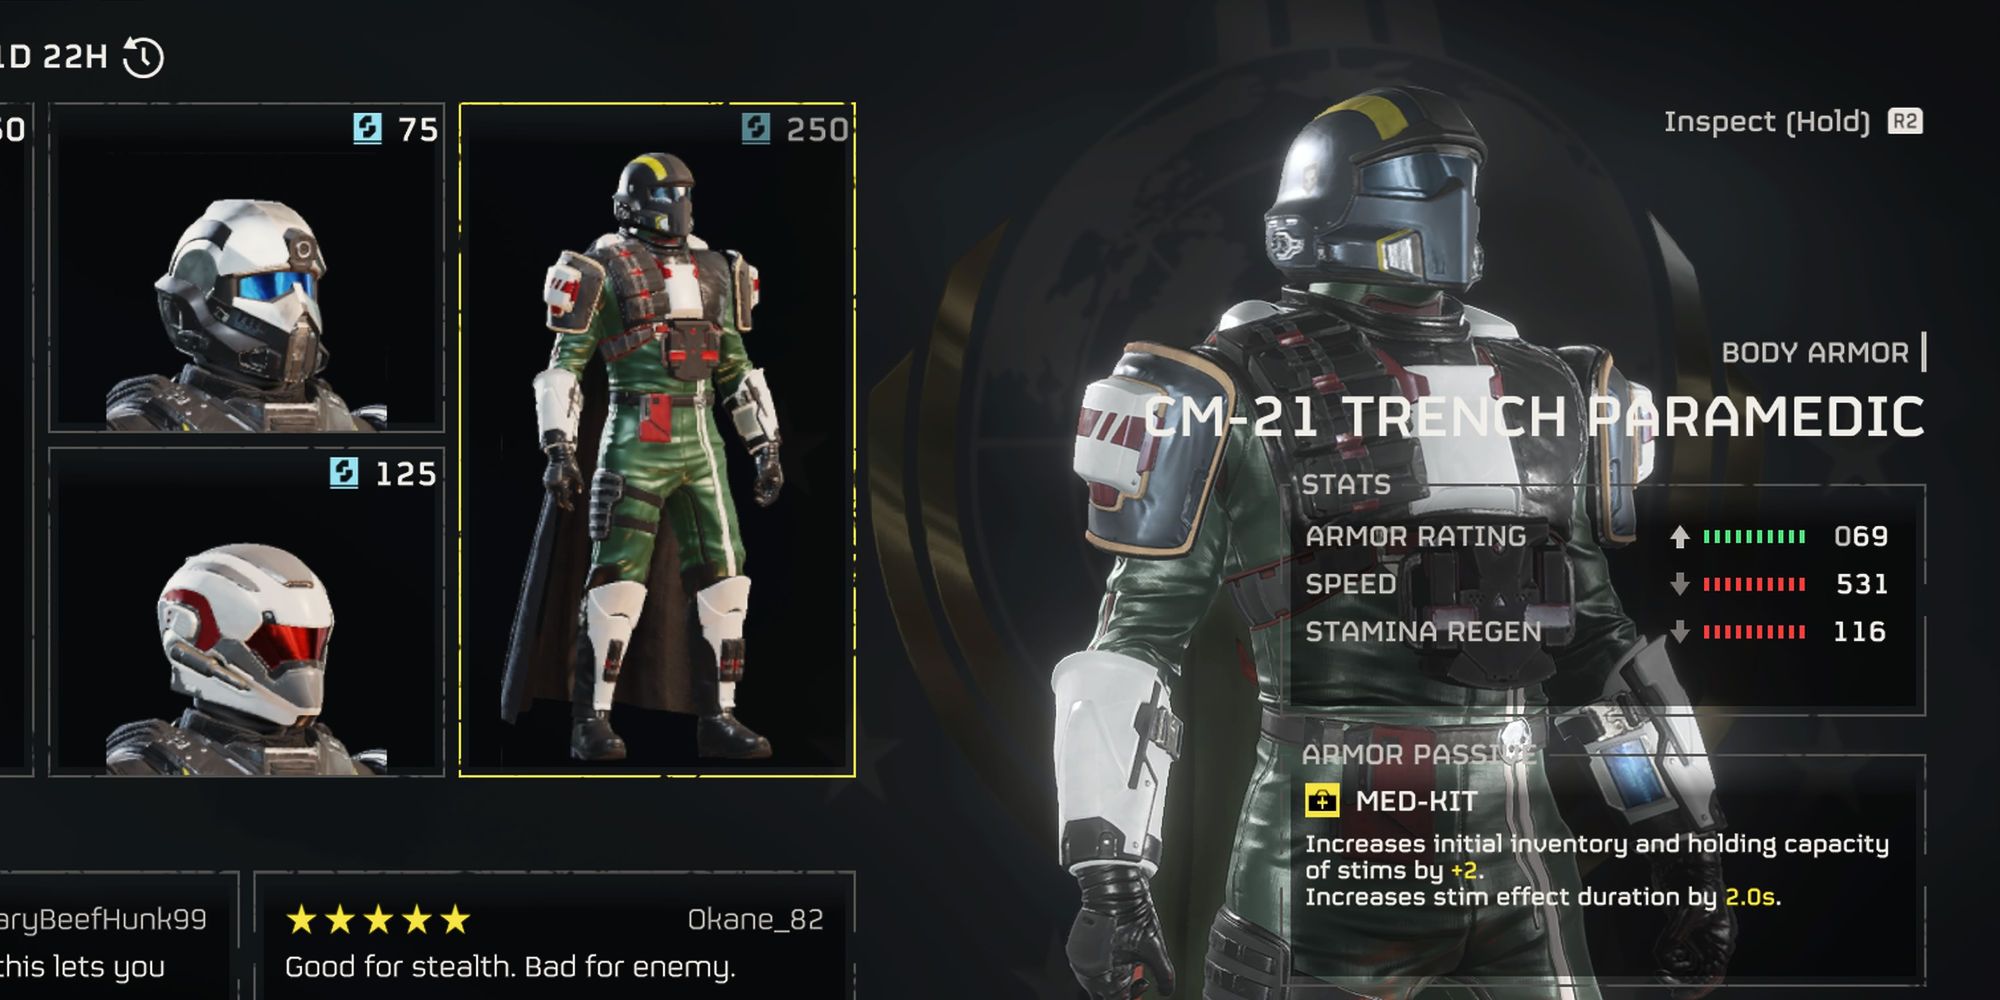 The stats for the Trench Paramedic Light Armor in Helldivers 2